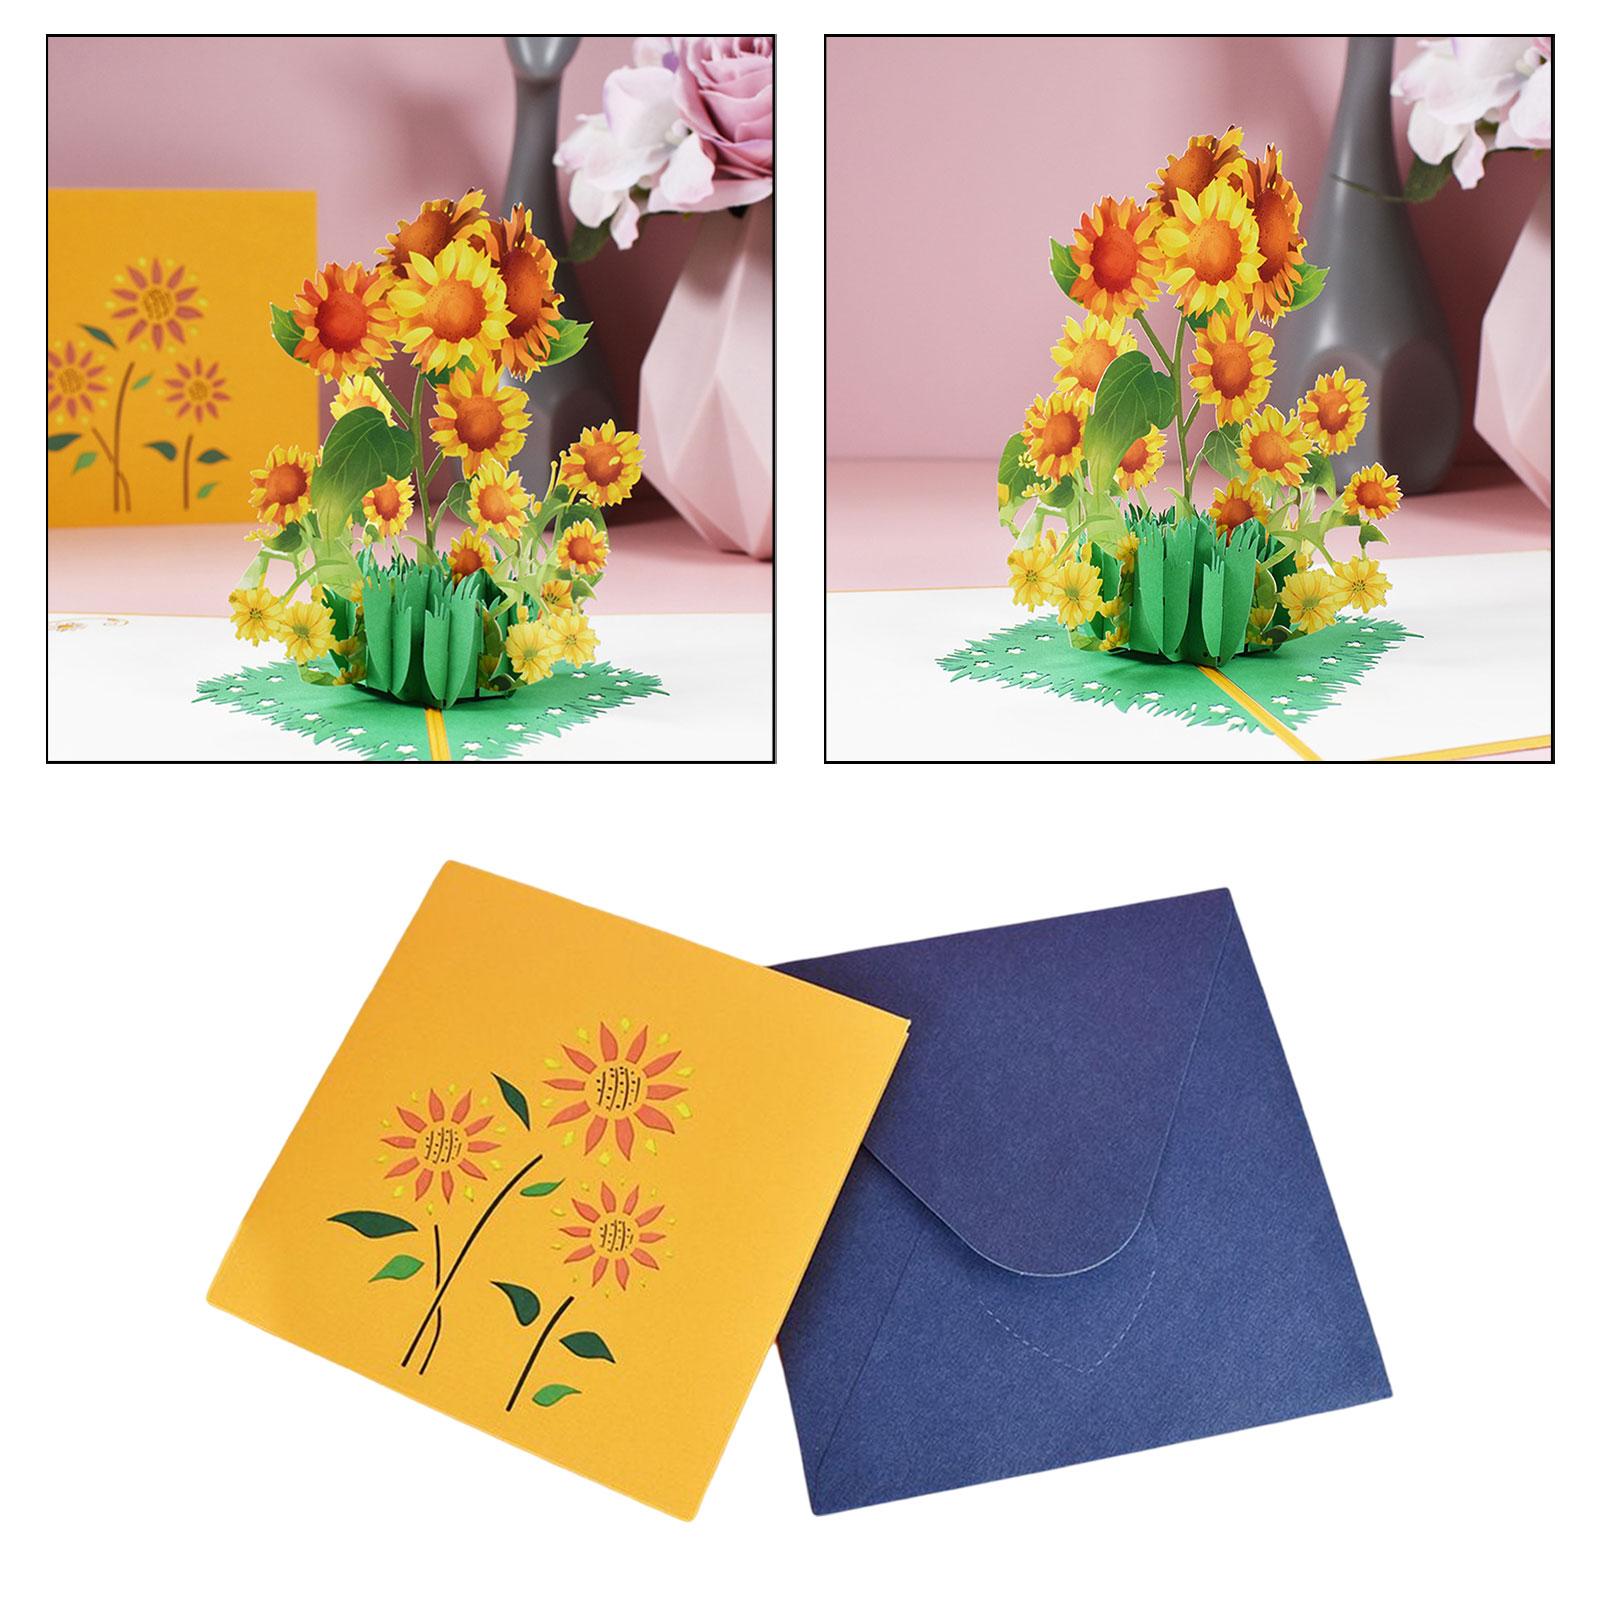 Sunflower Flowers Pop up Card 3D Greeting Card for Thinking You Party Favors